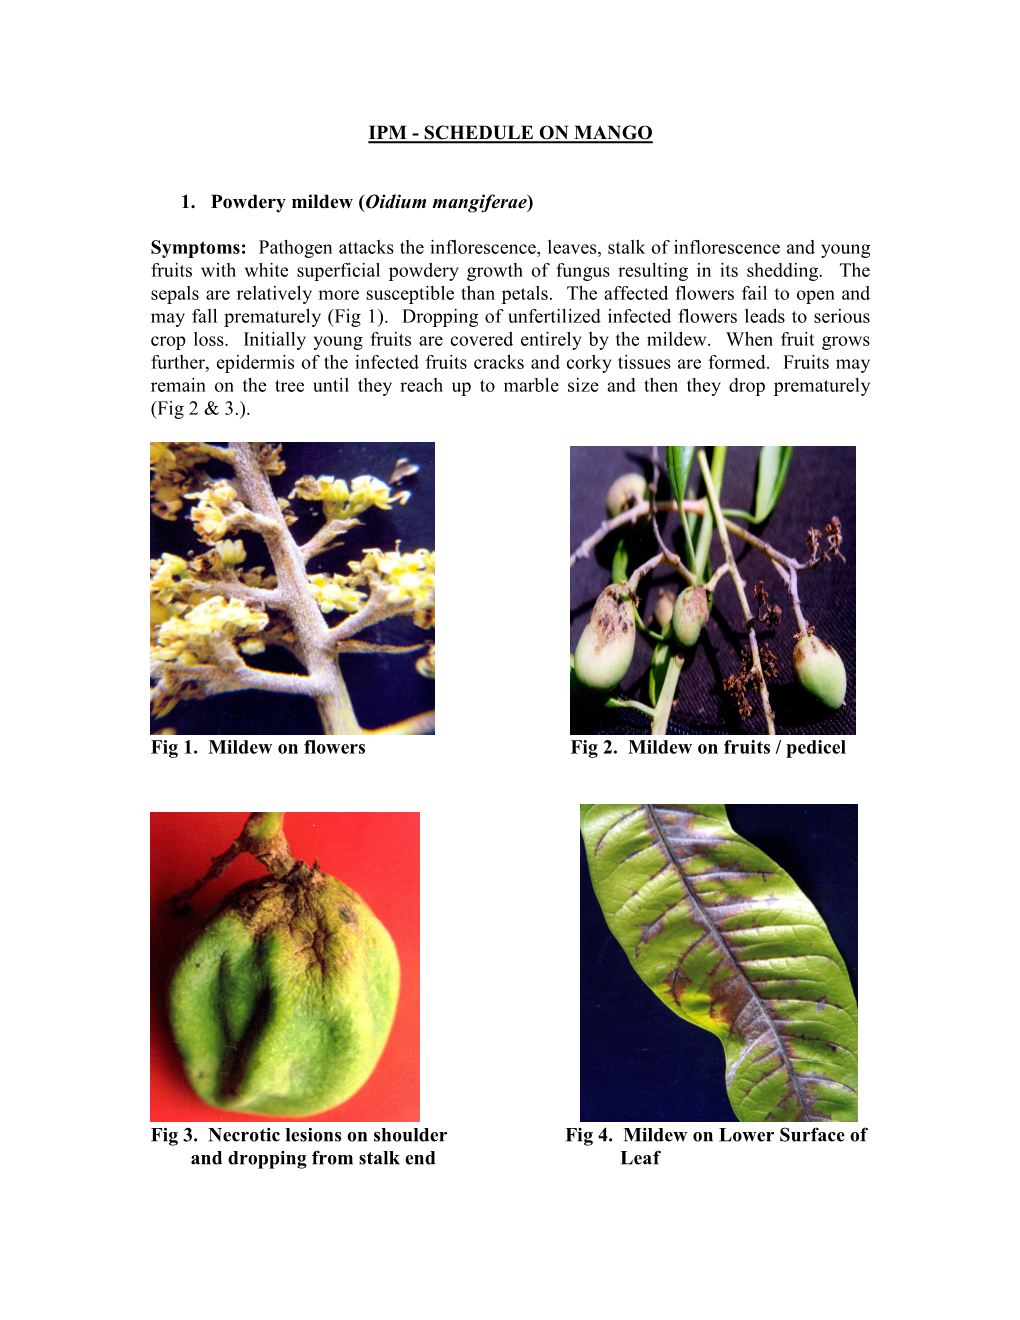 Symptoms: Pathogen Attacks the Inflorescence, Leaves, Stalk of In